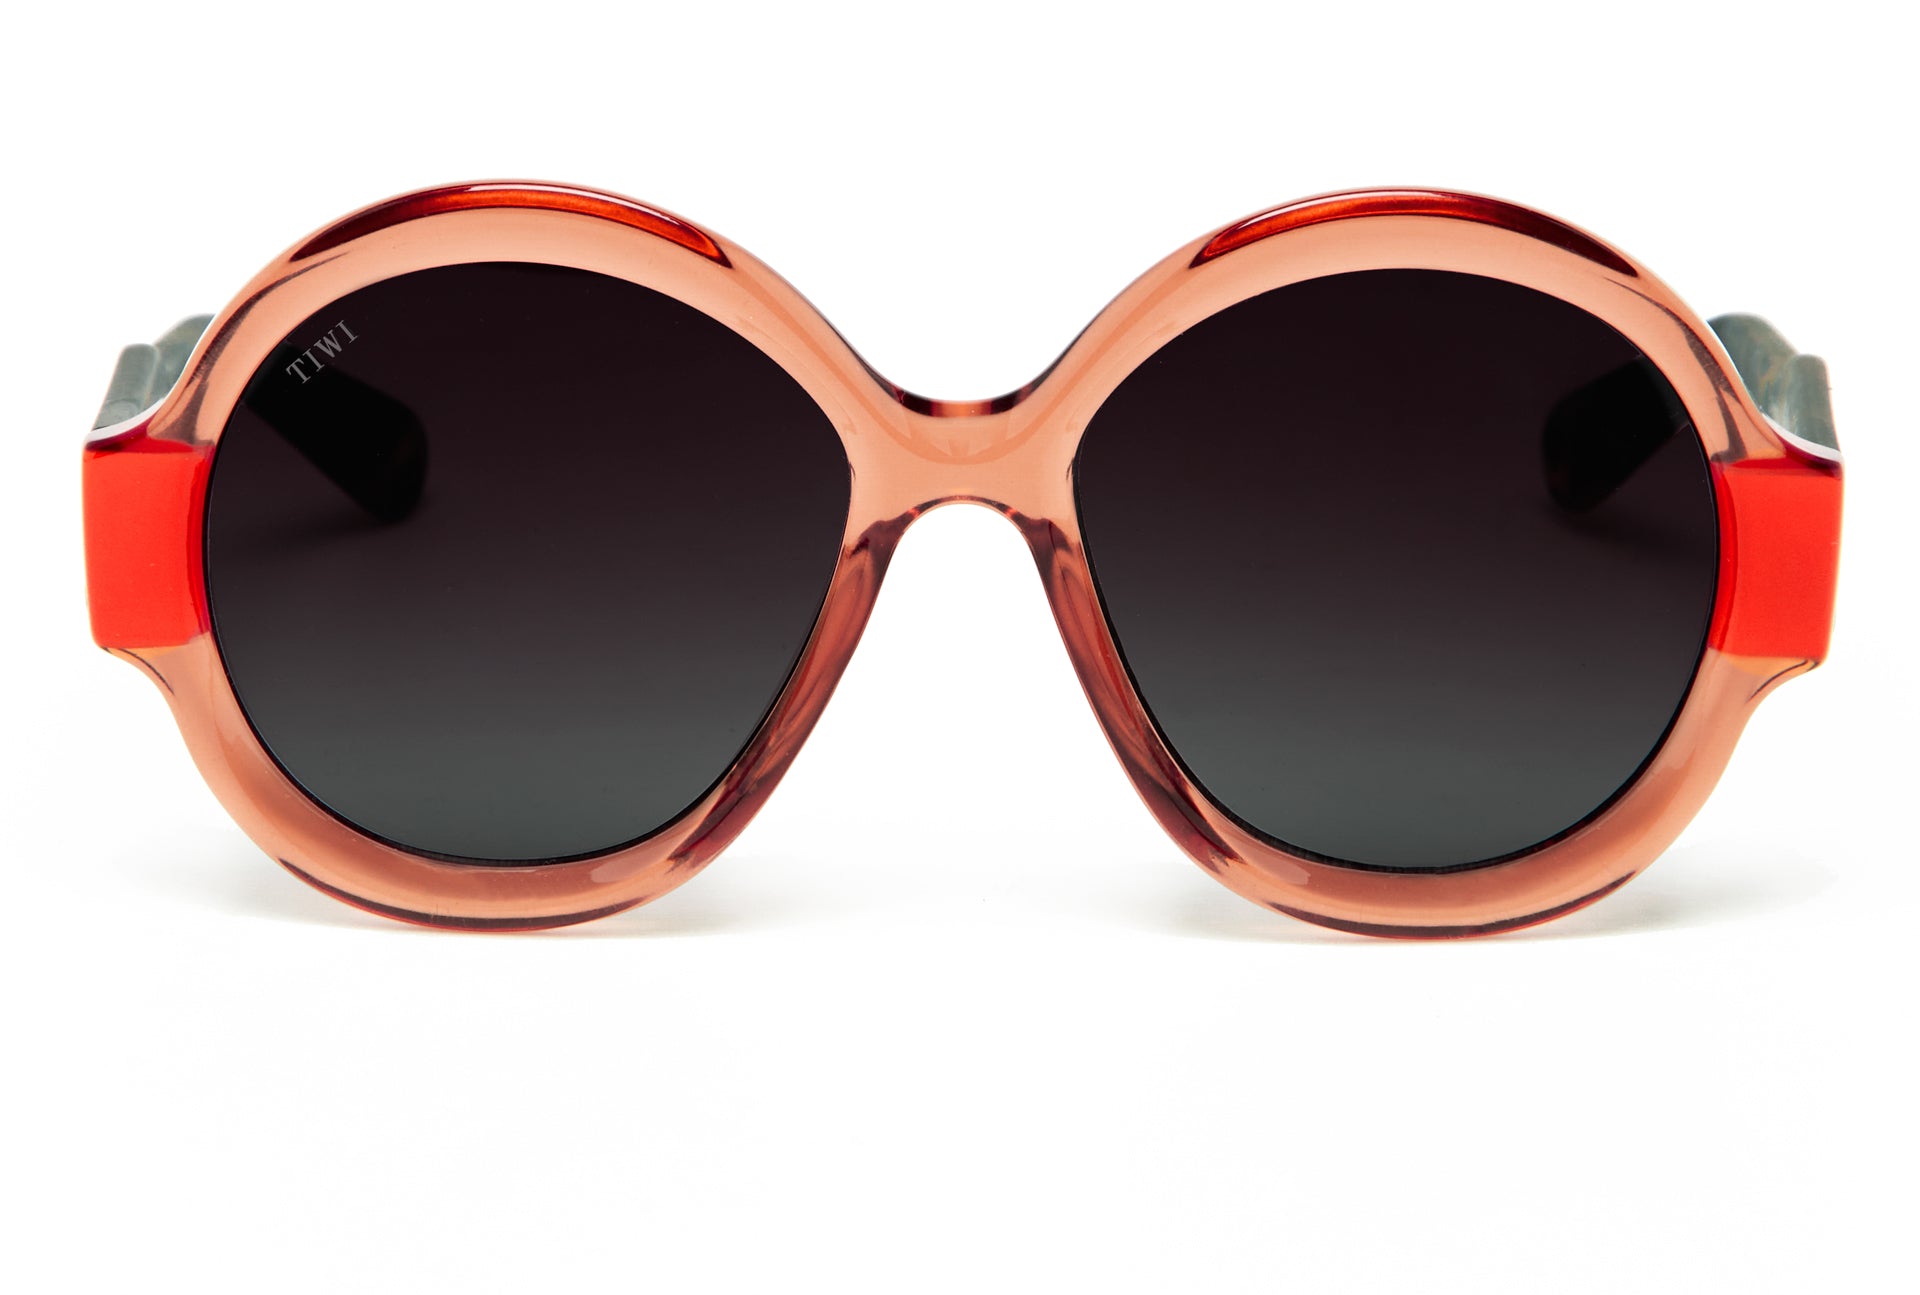 GAMBETTA Sunglasses Available in more colors Shiny Fluor Orange with Brown Gradient Lenses  